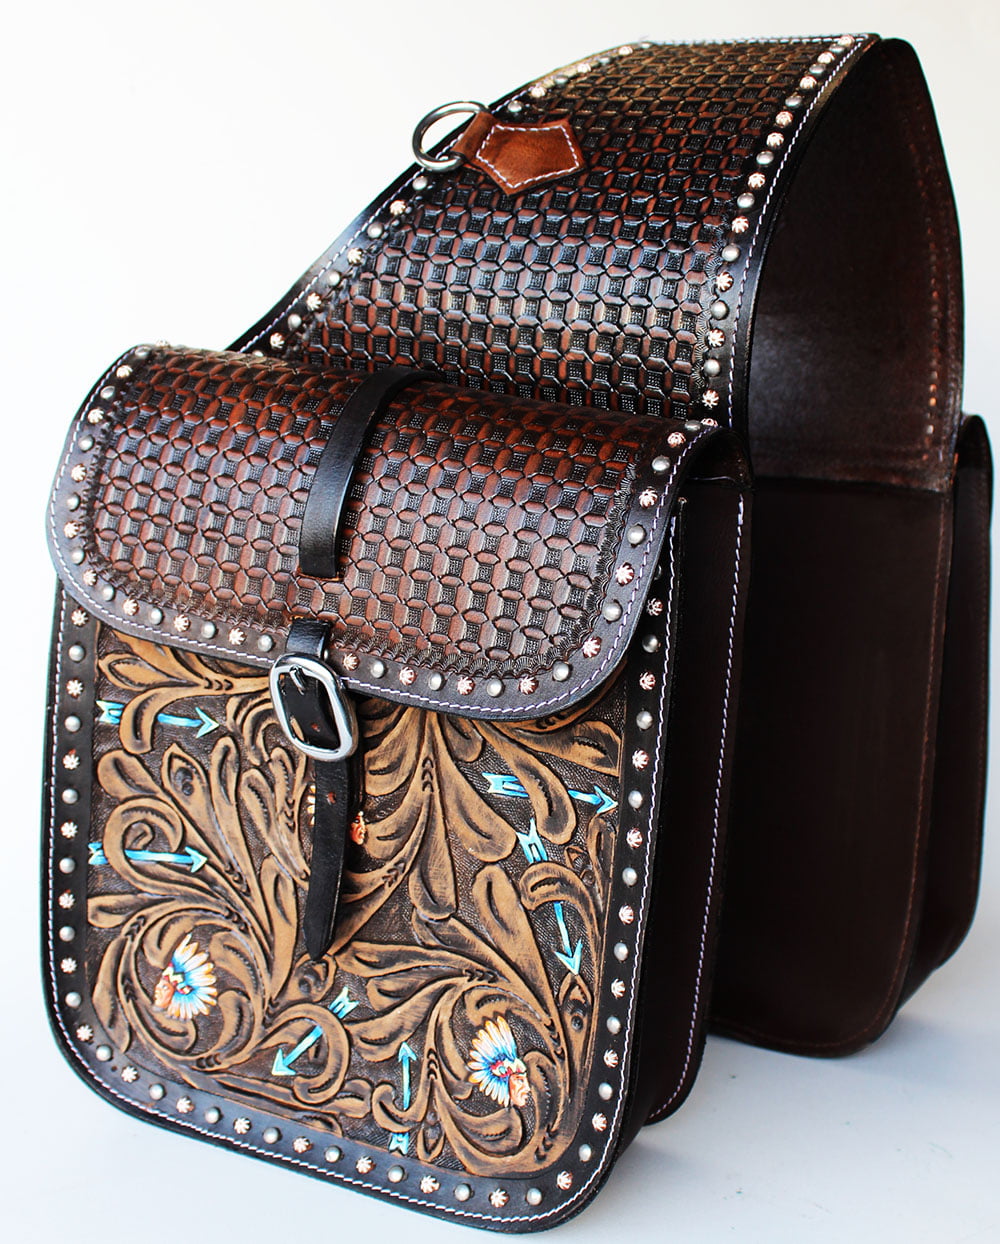 WESTERN TRAIL HORSE OR MOTORCYCLE SADDLE BAGS BAG HAND TOOLED BROWN LEATHER 